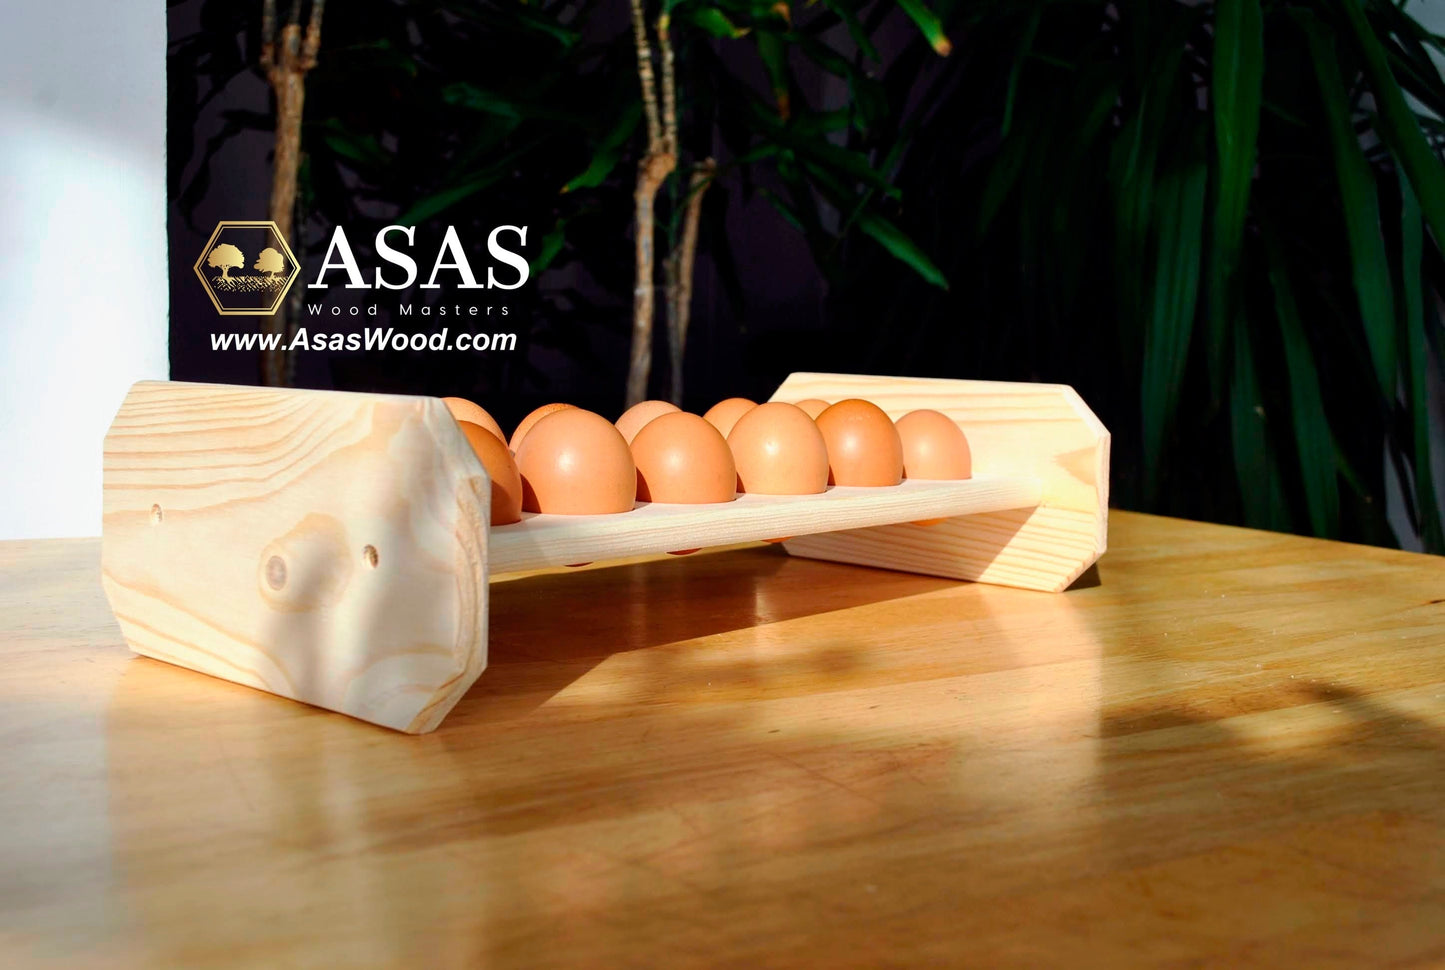 egg holder with dozen eggs on the table, made by AsasWood